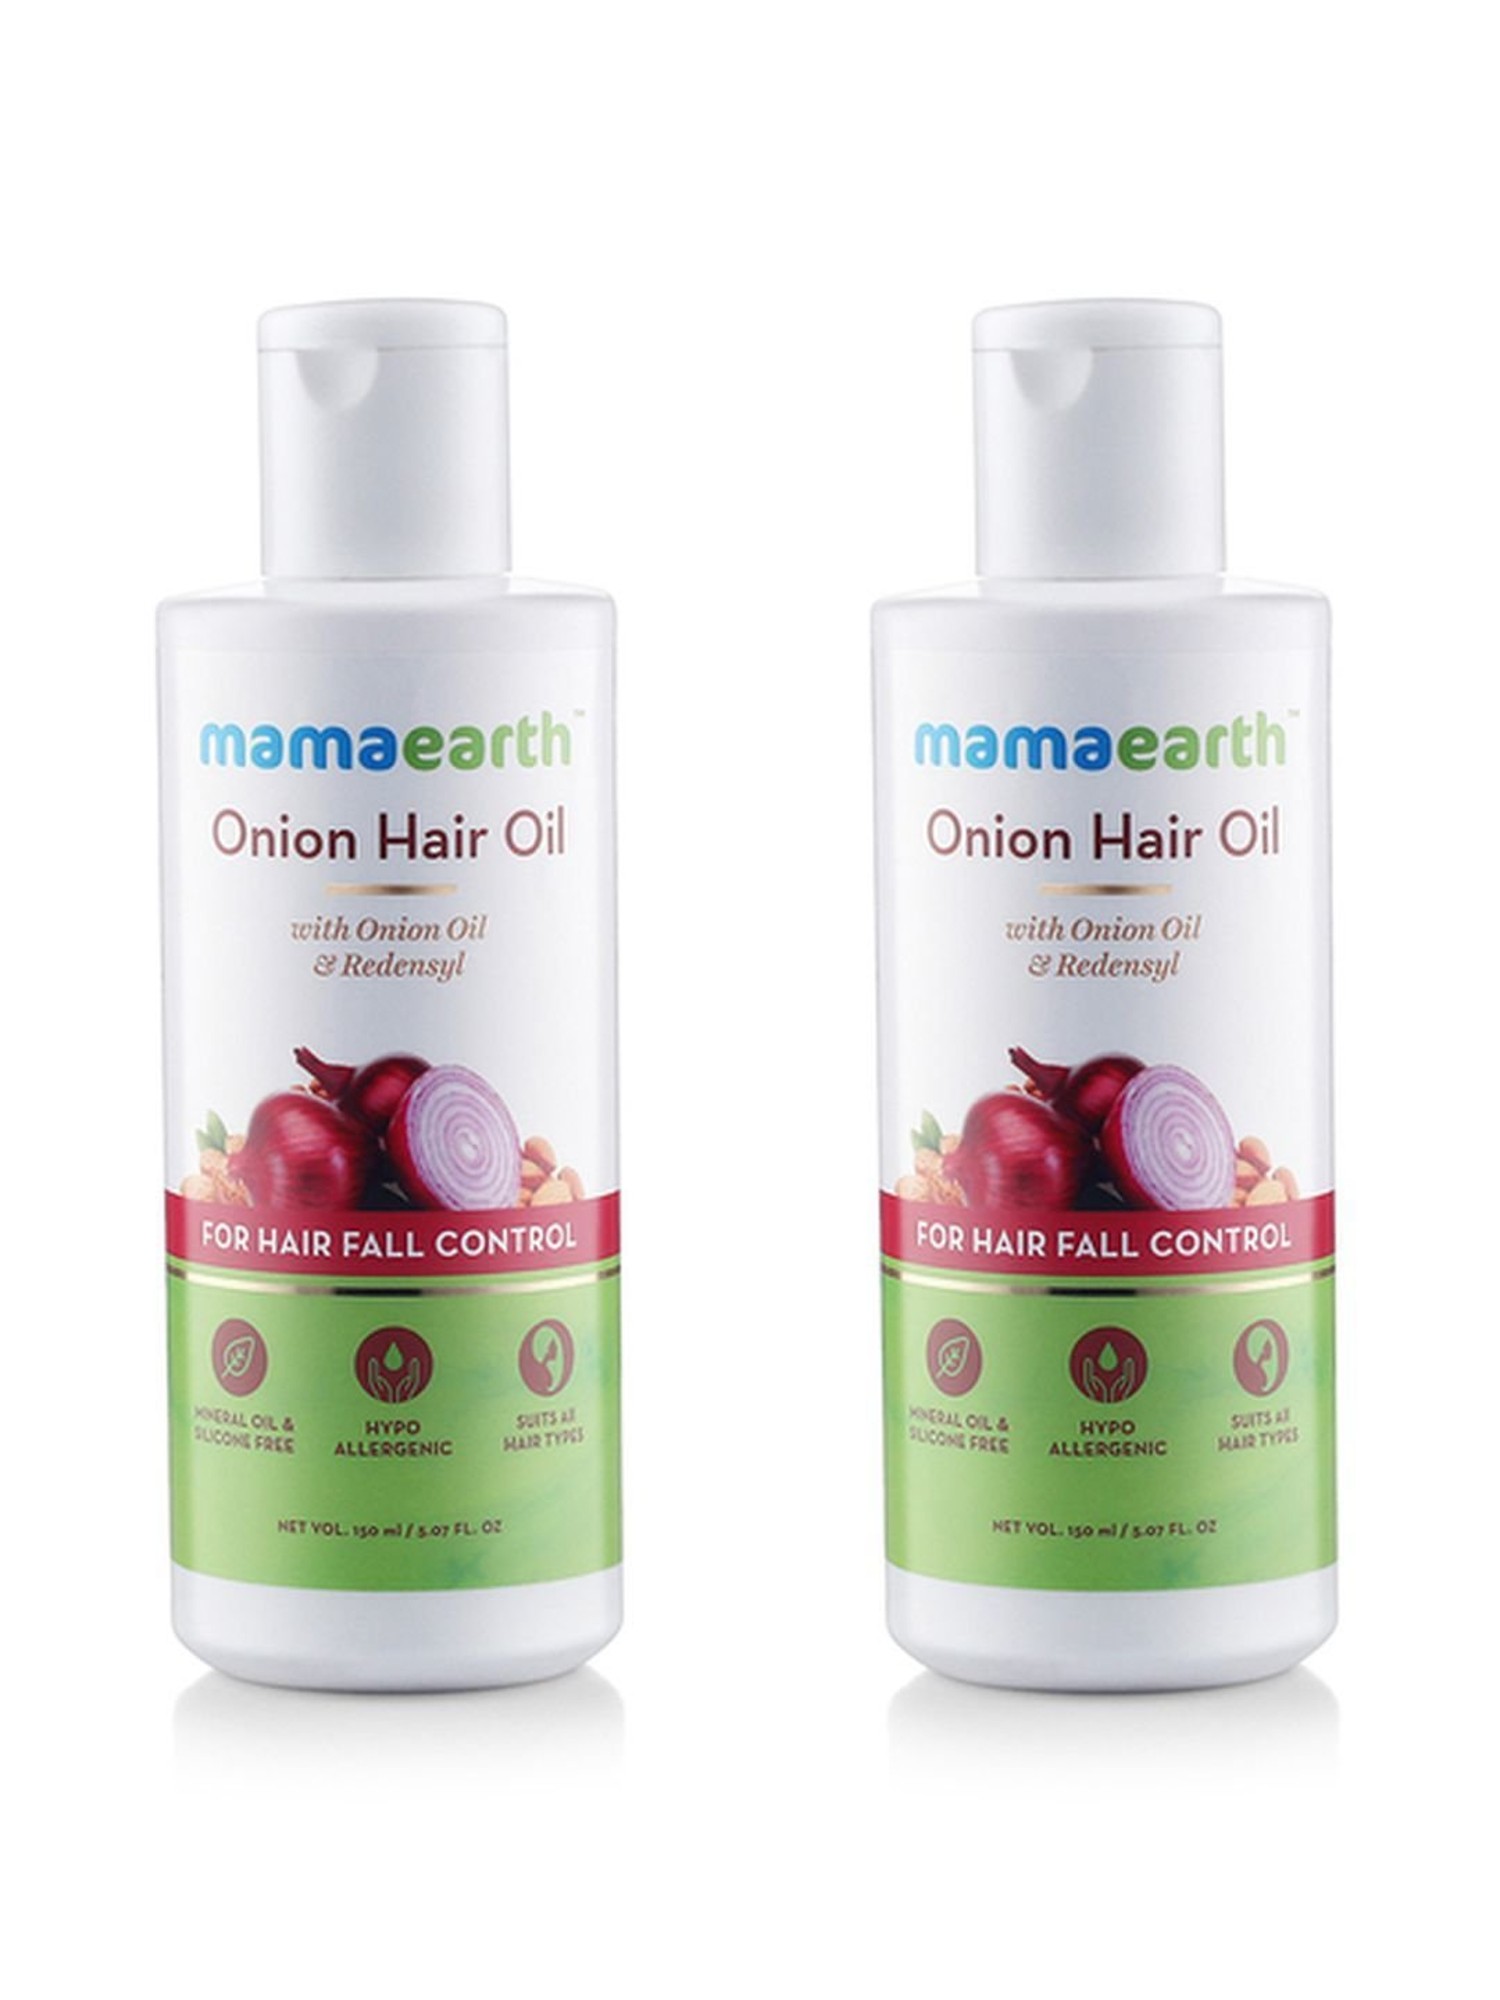 After how much time of use does Mamaearth Hairfall Control Kit (onion hair  oil, onion shampoo and onion conditioner) show effective results? - Quora